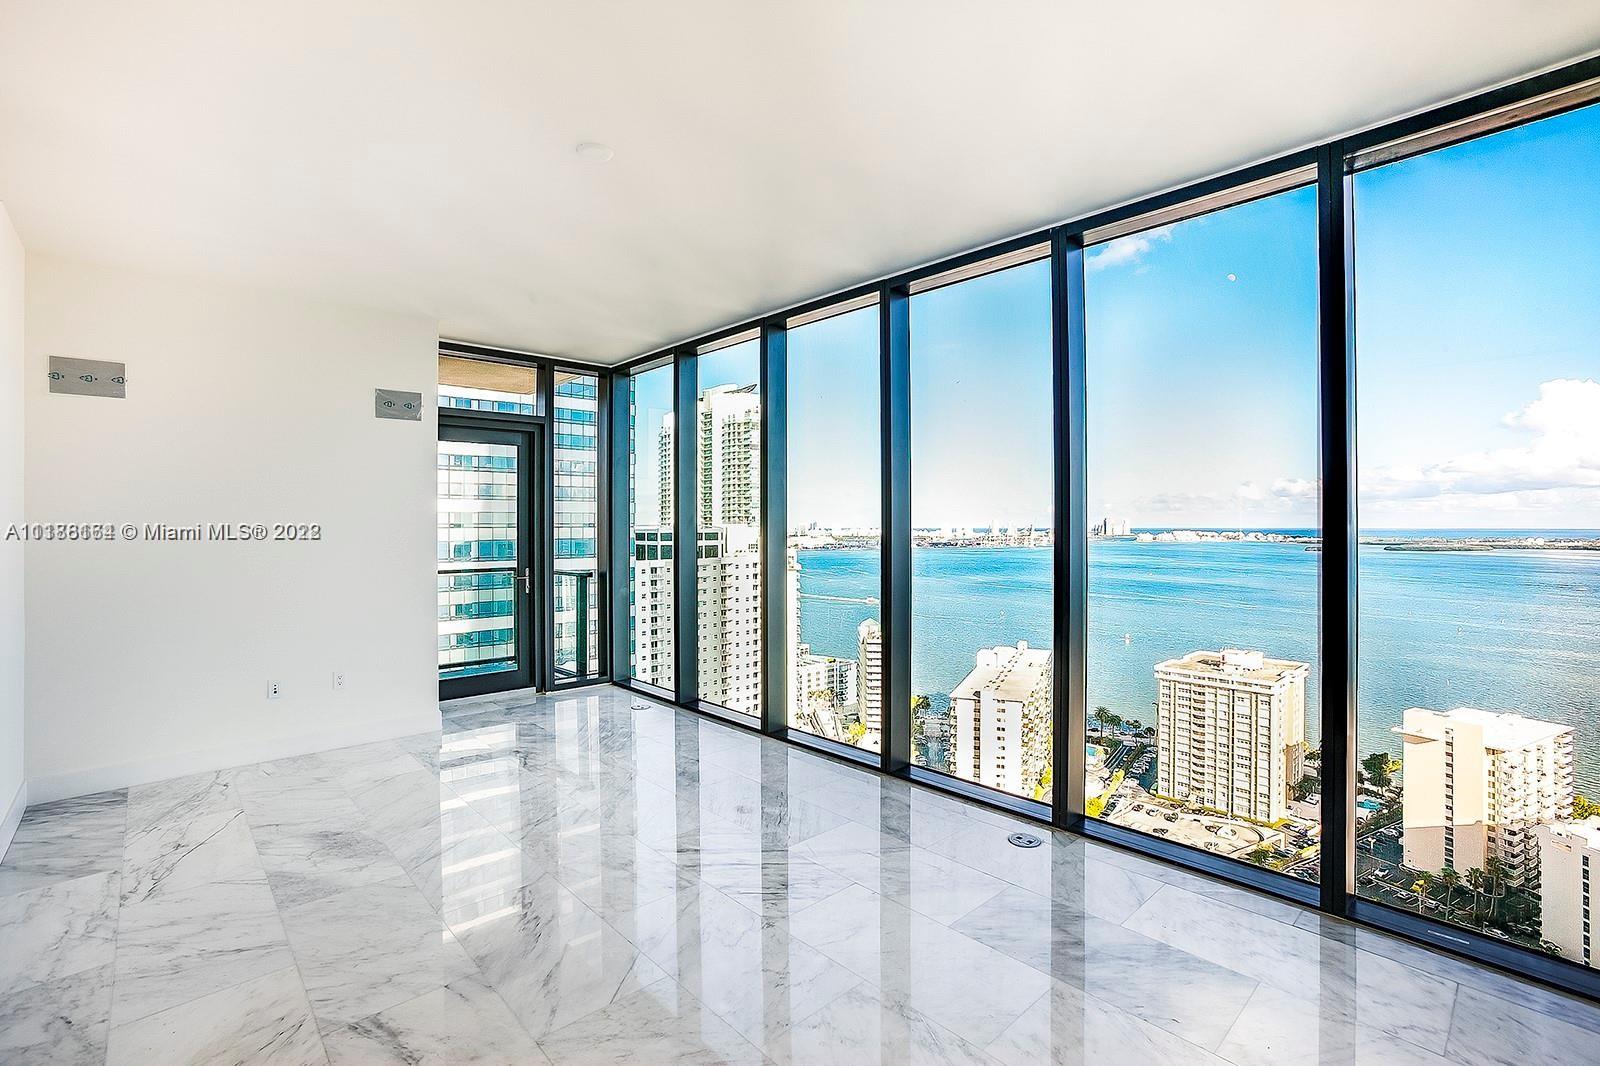 1451 Brickell Ave 3701, Miami, Florida 33131, 2 Bedrooms Bedrooms, ,3 BathroomsBathrooms,Residential,For Sale,1451 Brickell Ave 3701,A11188164